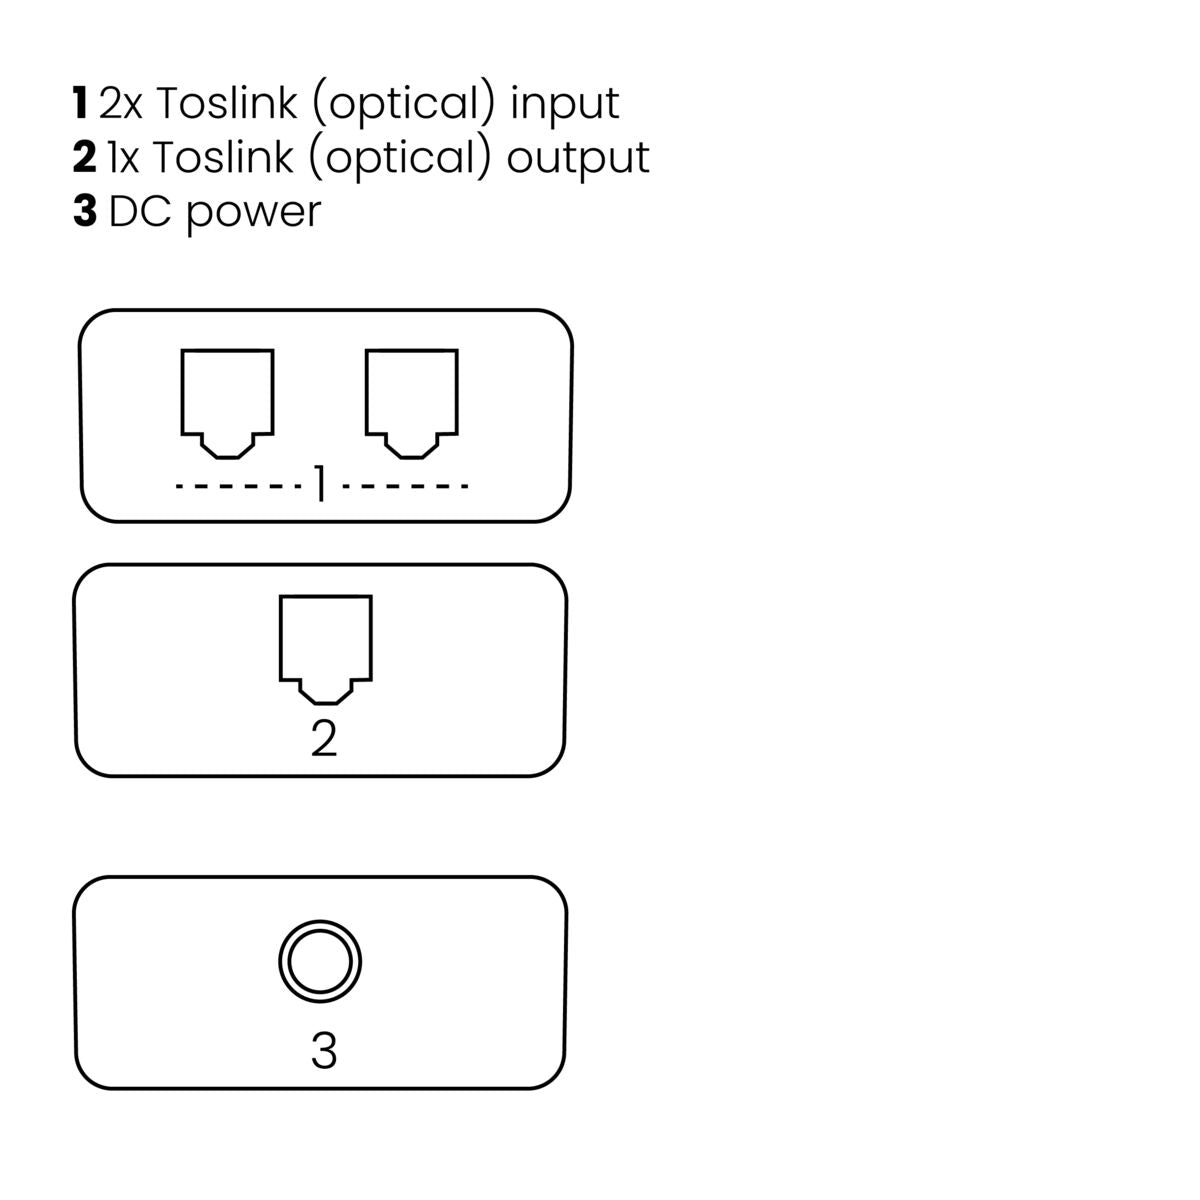 Connect TS21 - Optical Toslink switch 2 in / 1 out - Connections Drawing | Marmitek